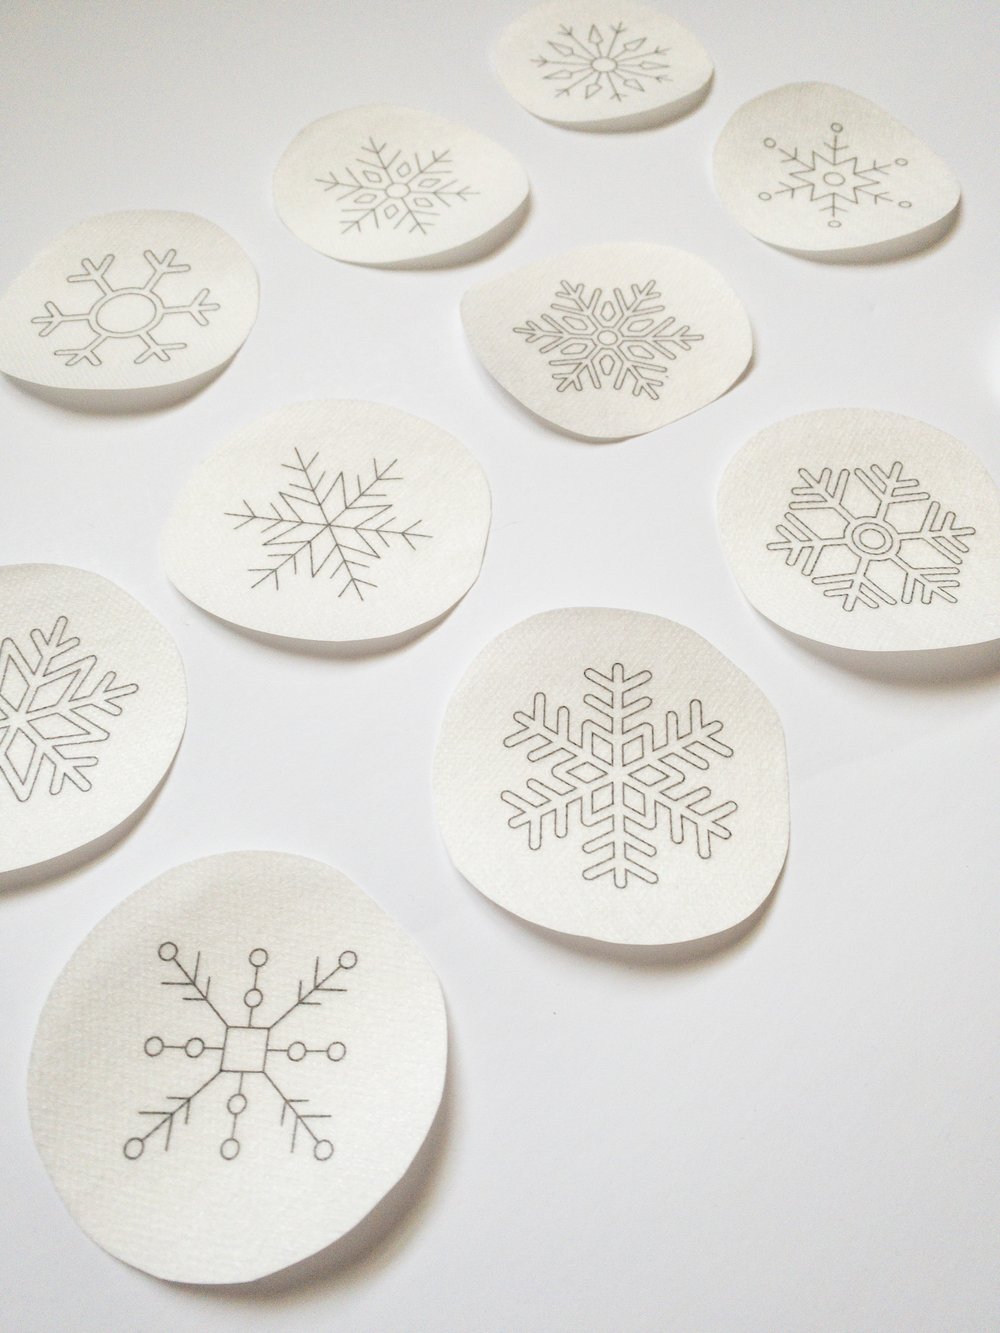 Snowflakes Stick & Stitch Embroidery Patterns — Olmsted Needlework Co.